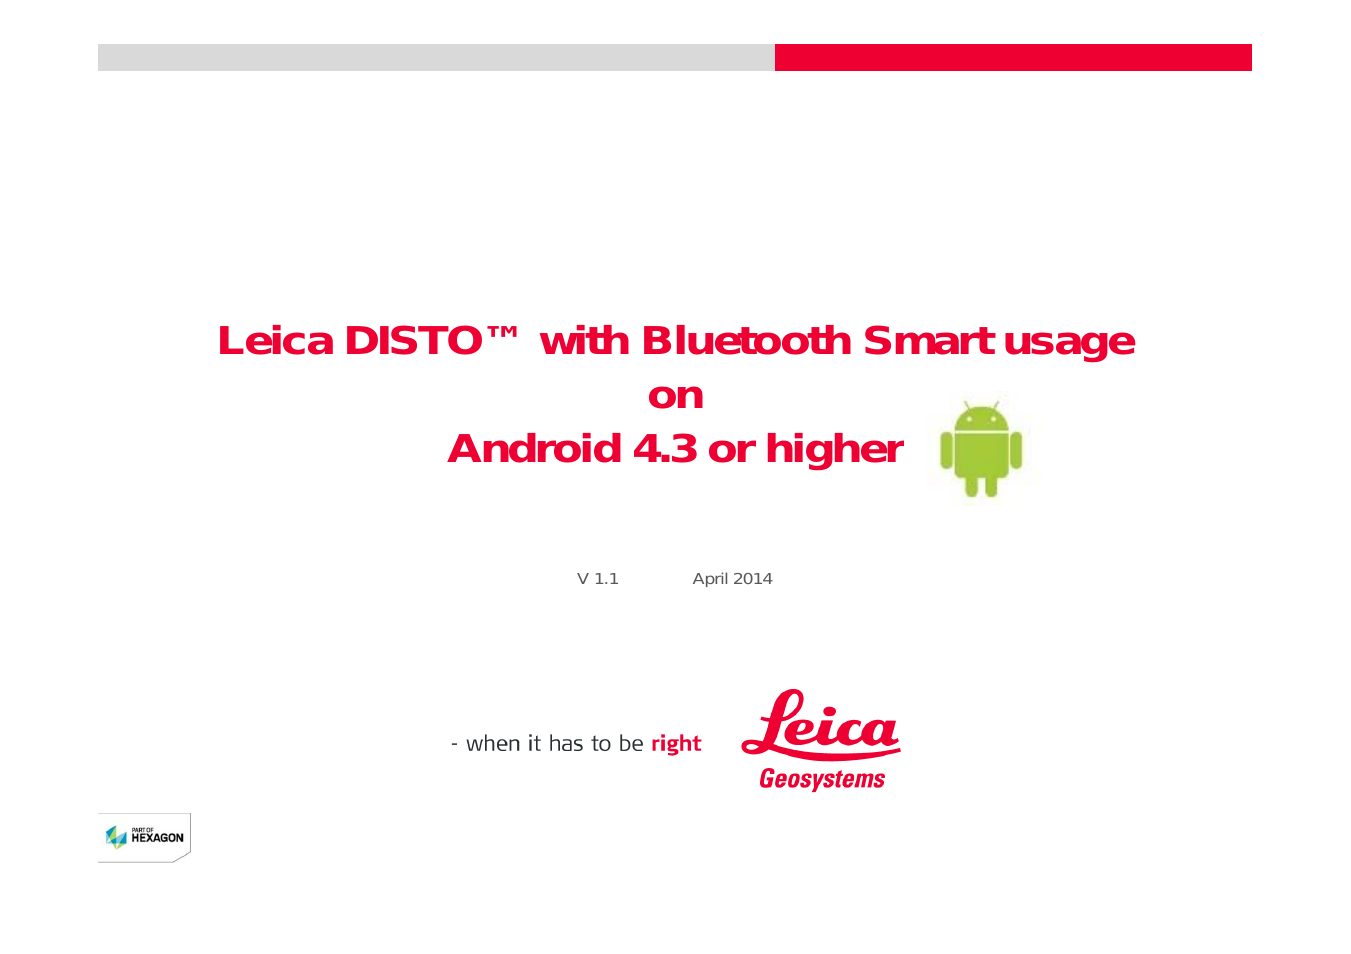 DISTO + Bluetooth – getting started on Android